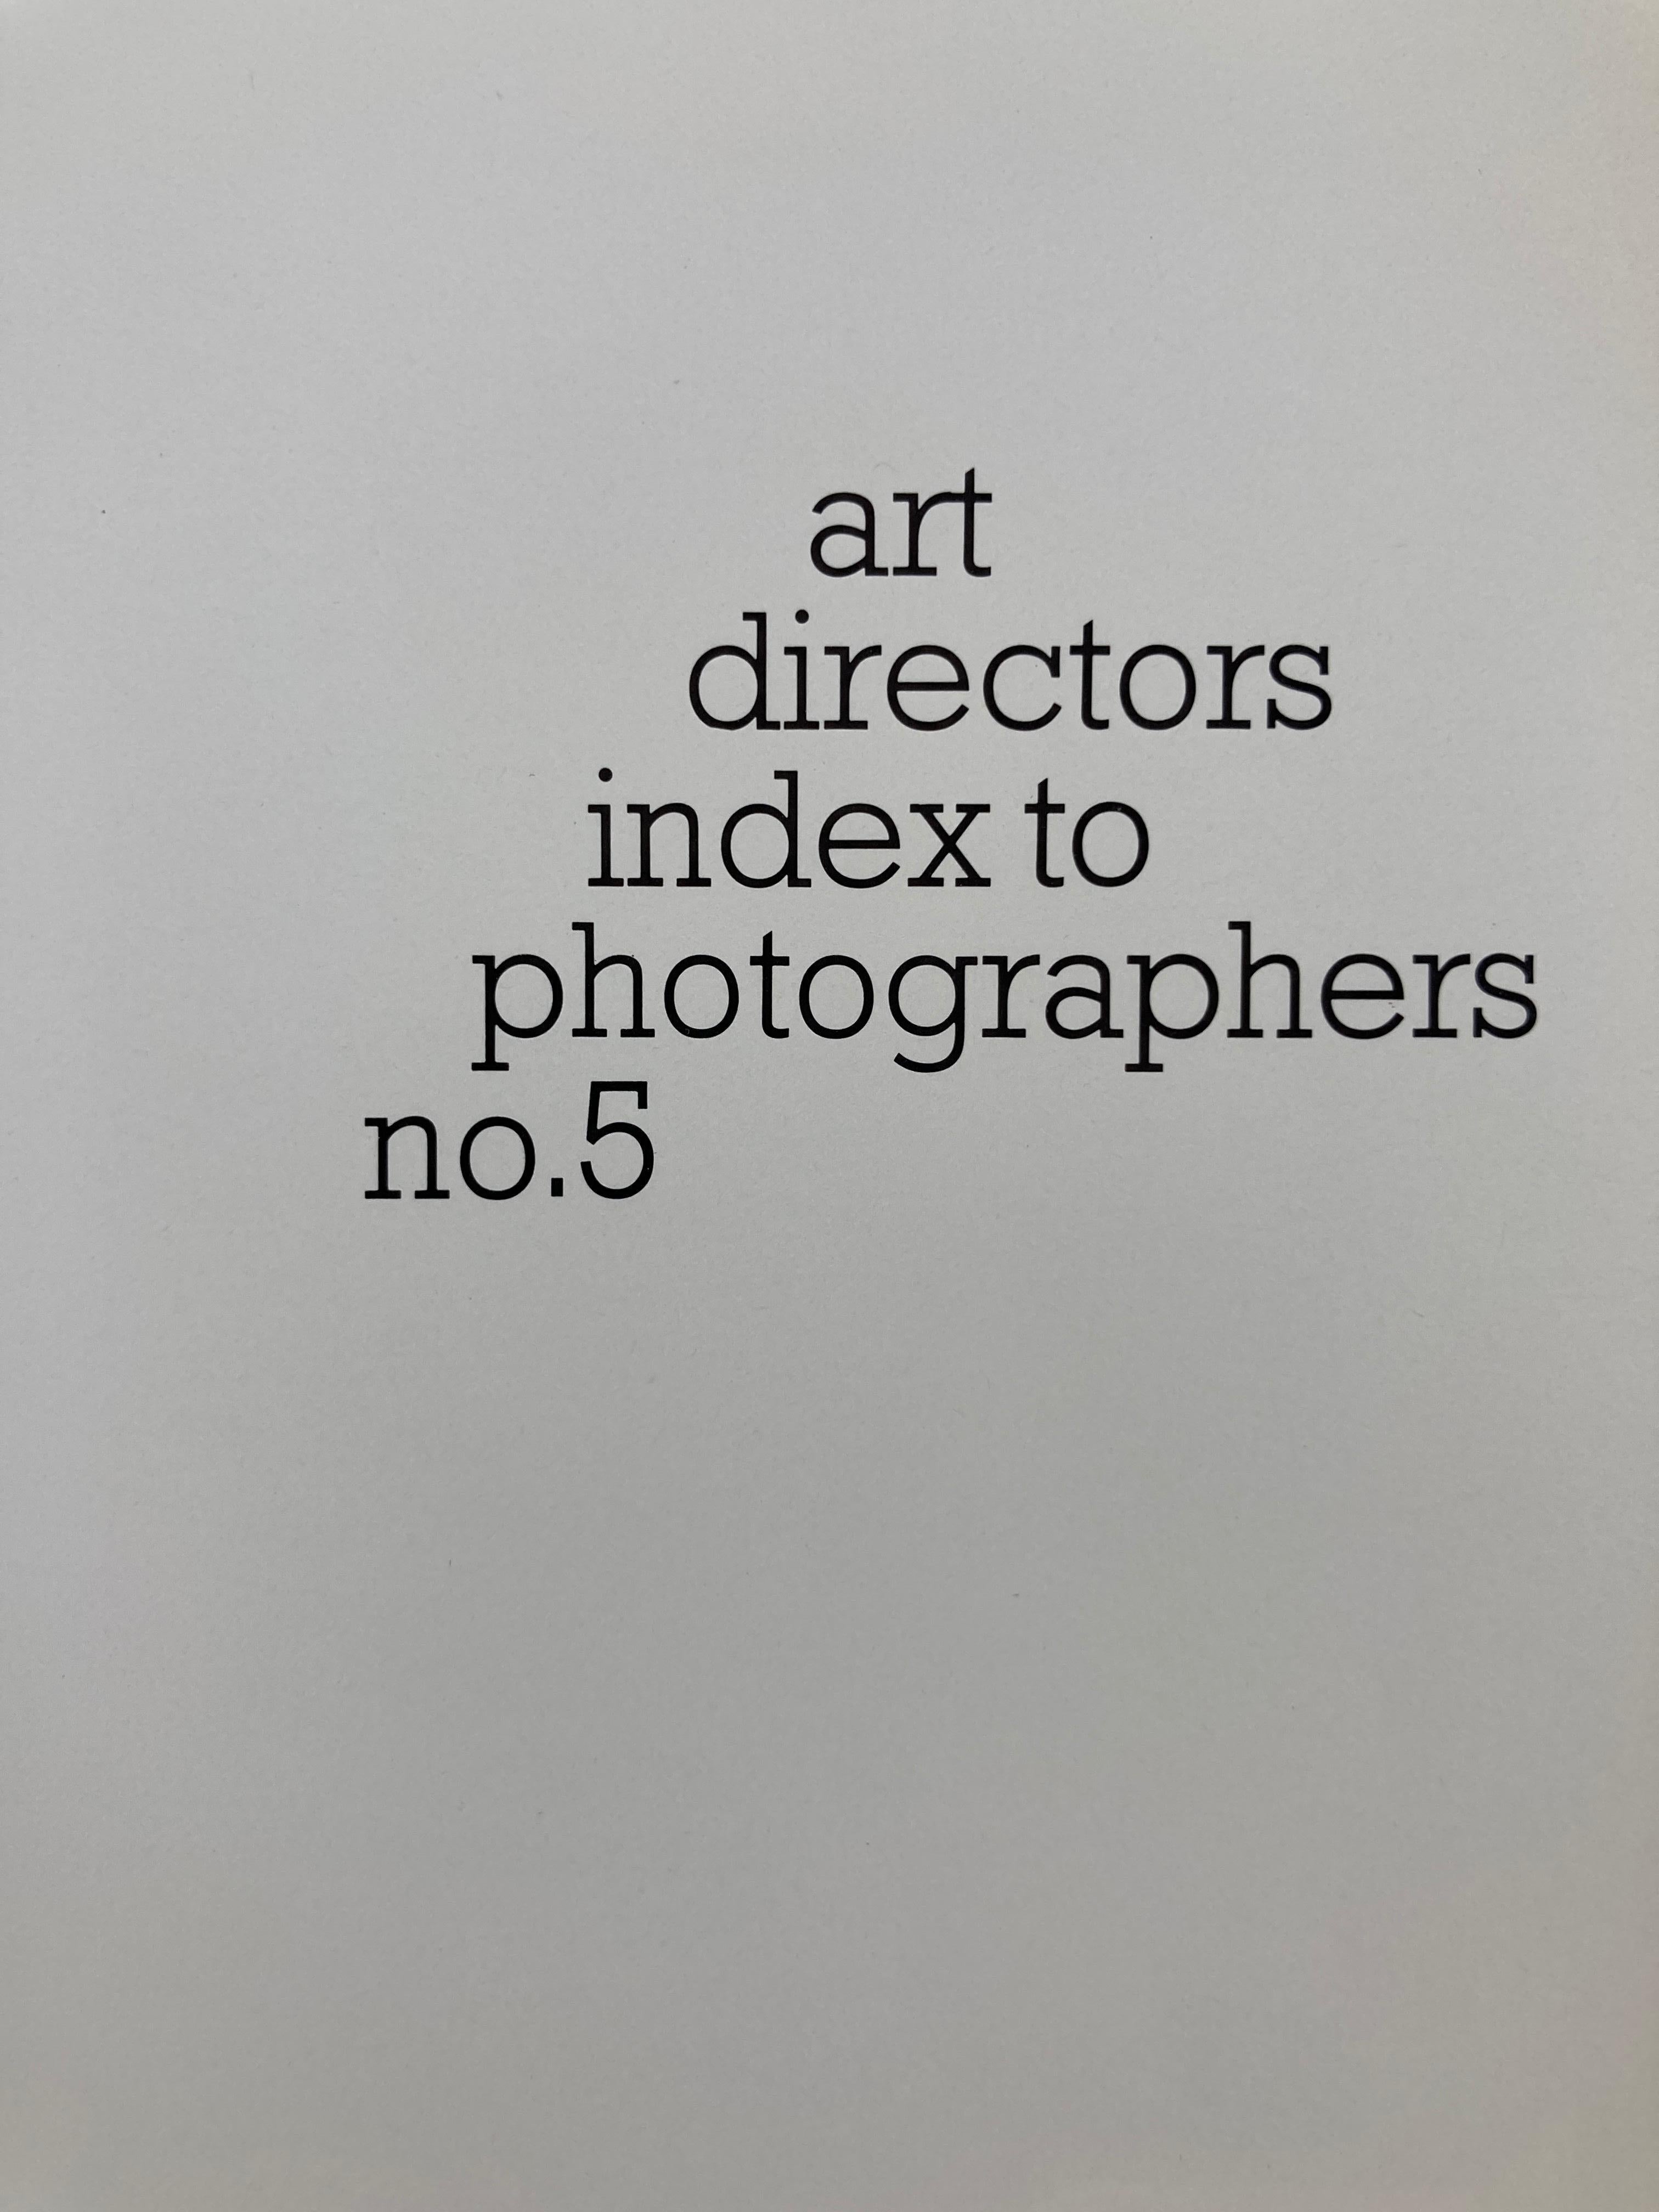 American Art Director's Index to Photographers No. 5 Hardcover, January 1, 1977 Book For Sale